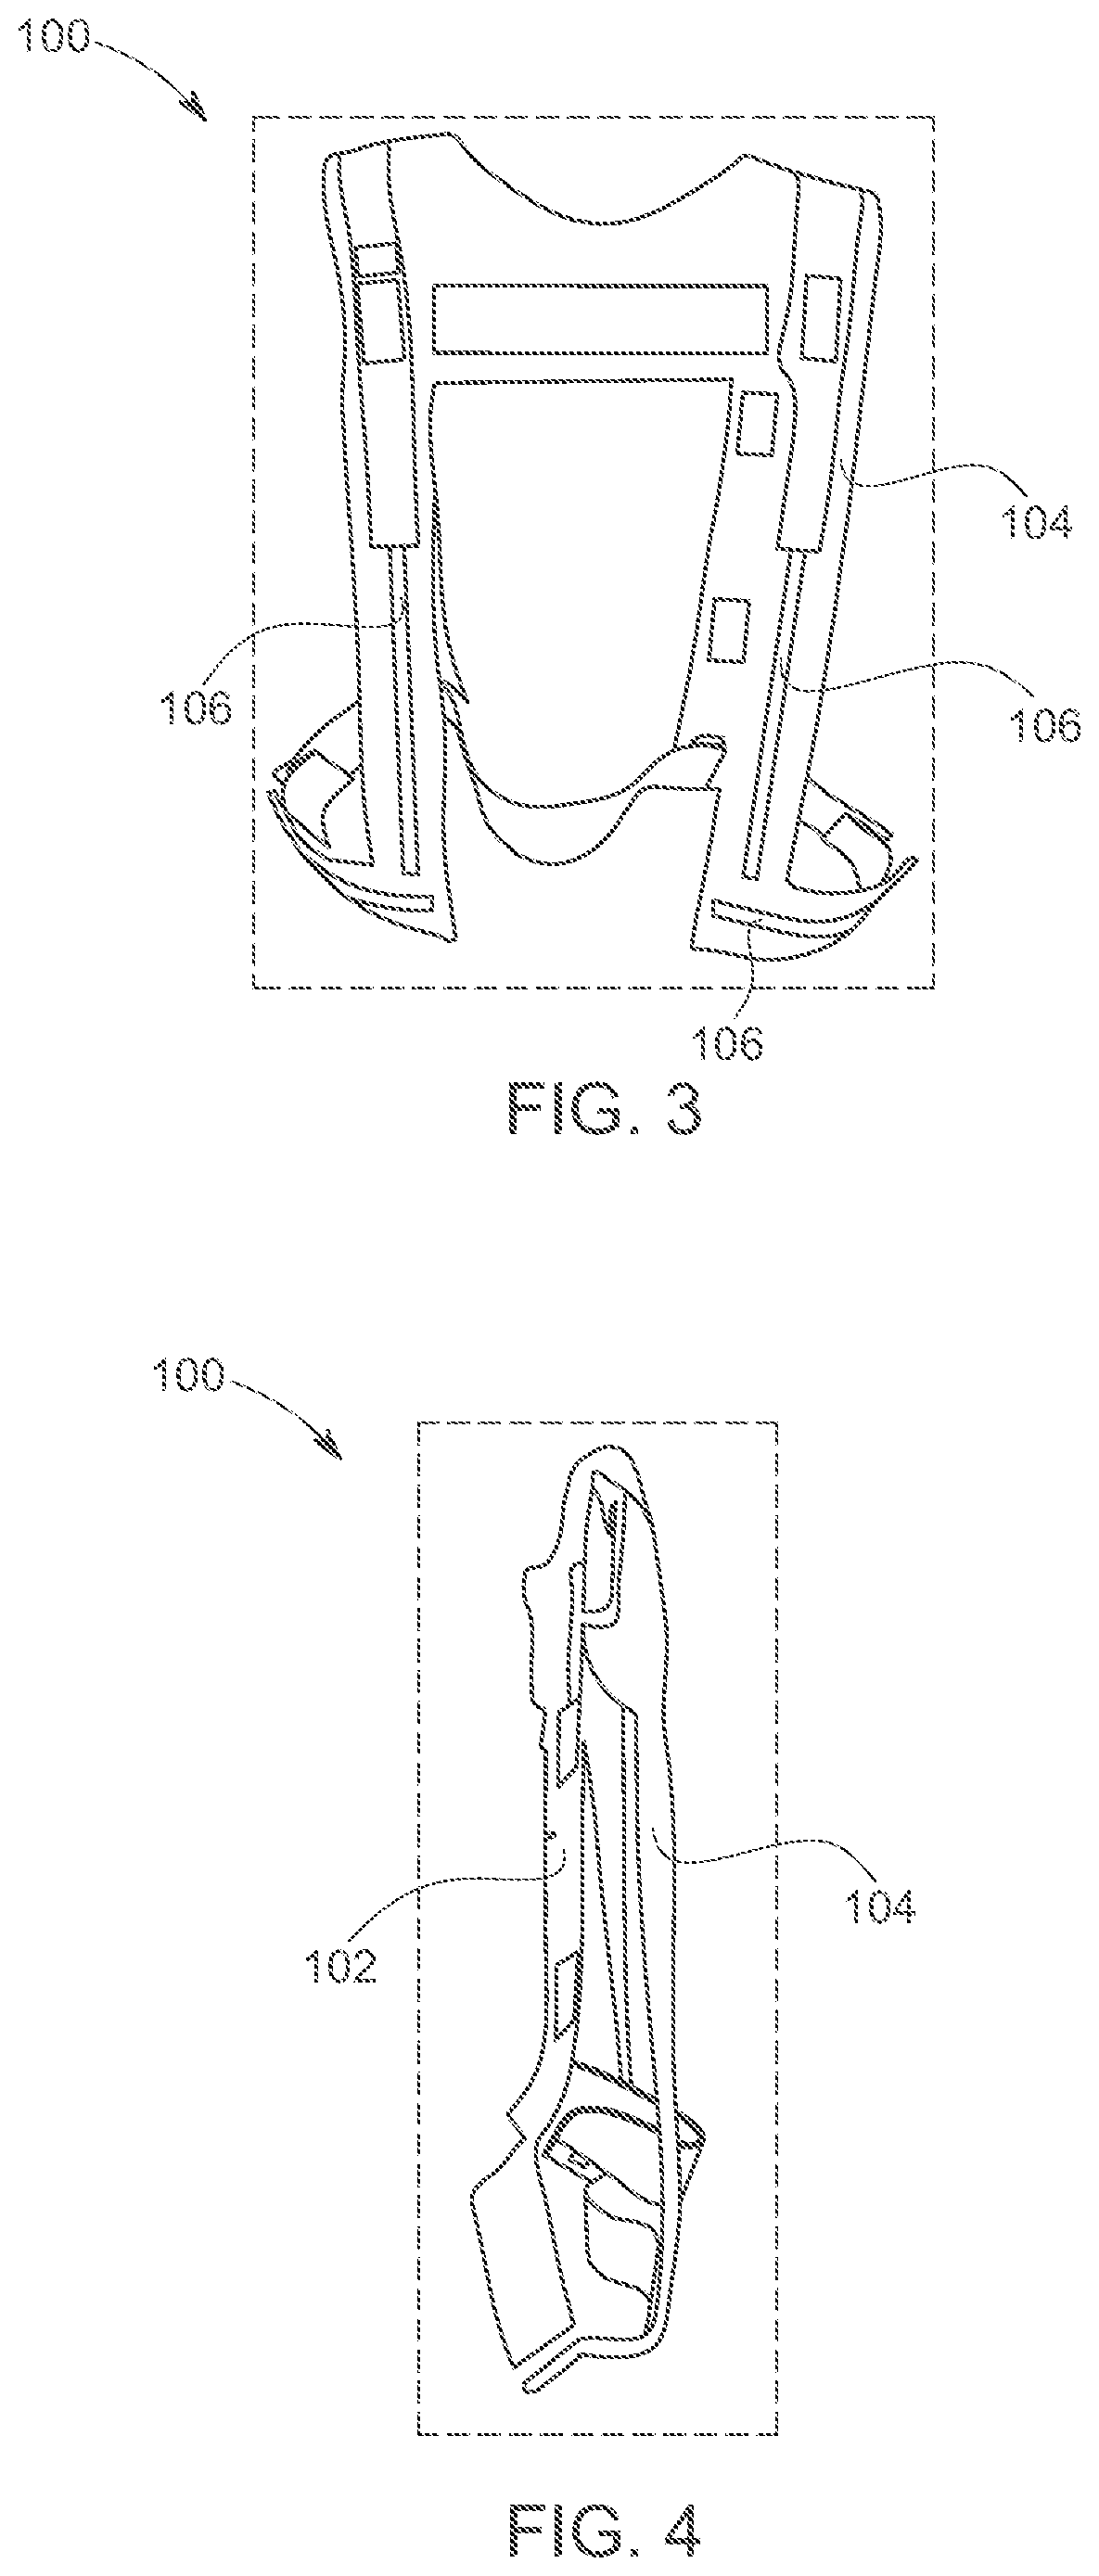 Enhanced visibility human device and multifunctional systems